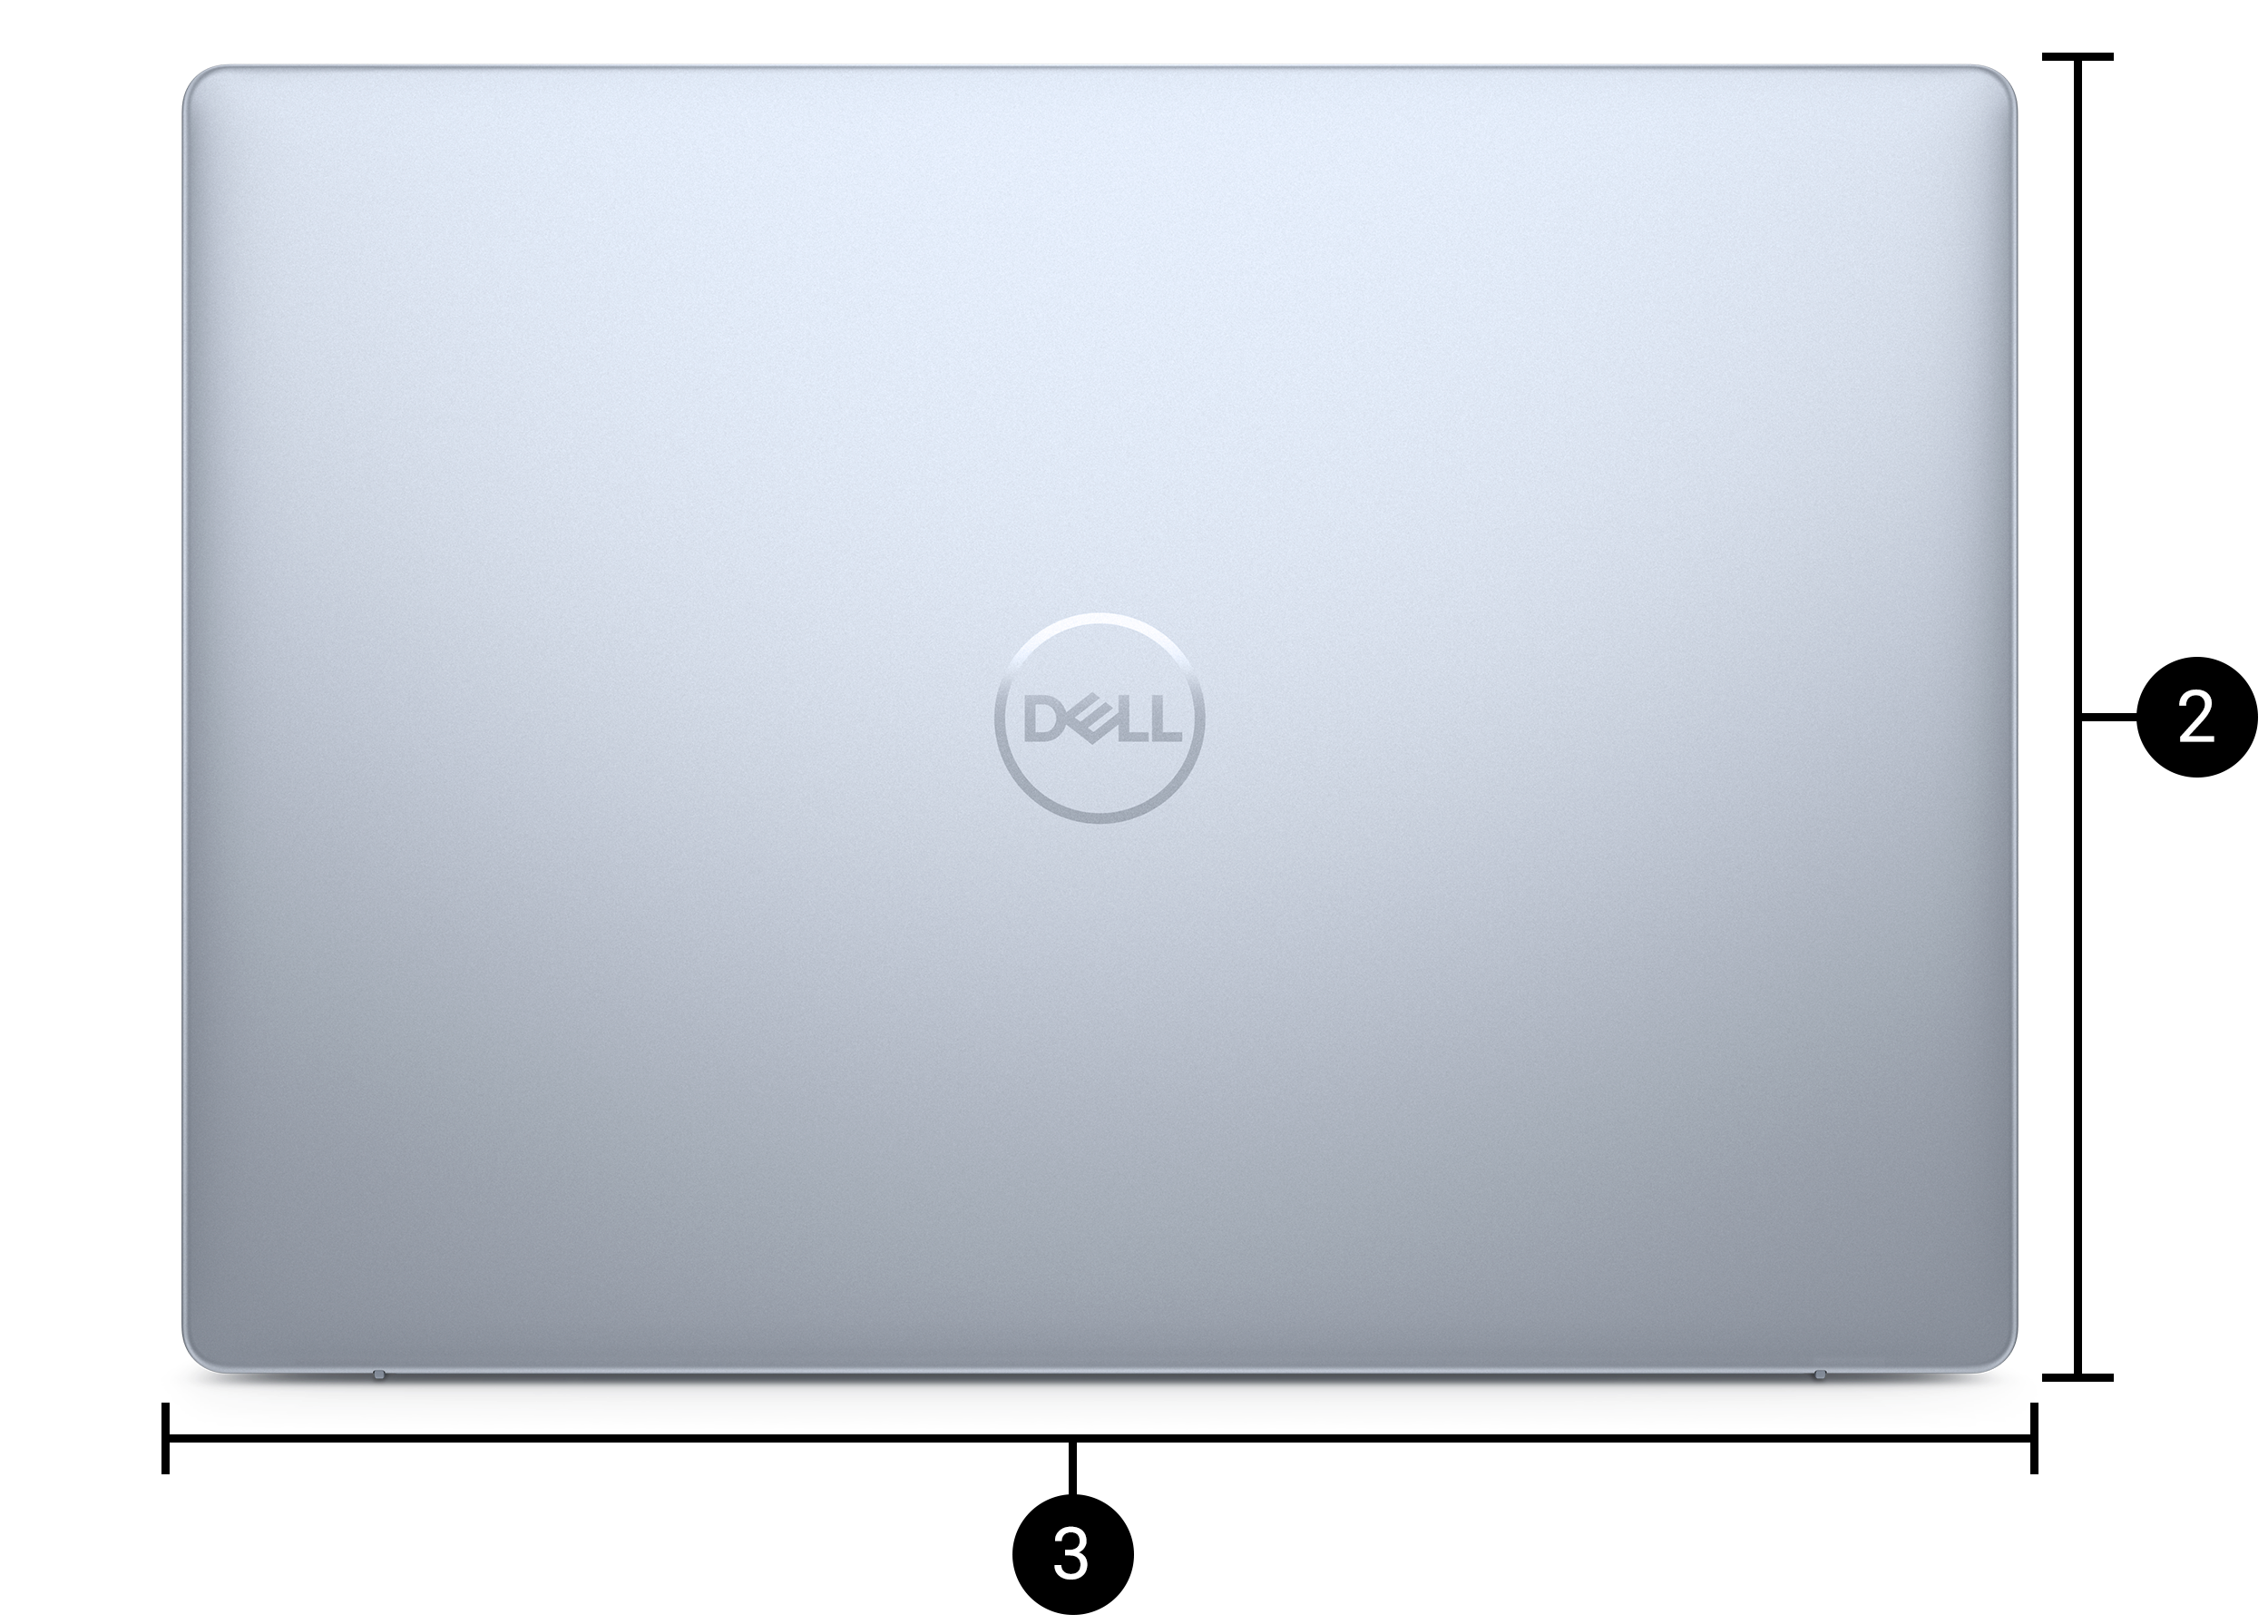 Dell Inspiron 14 Plus - Touch Screen Laptop | Dell USA